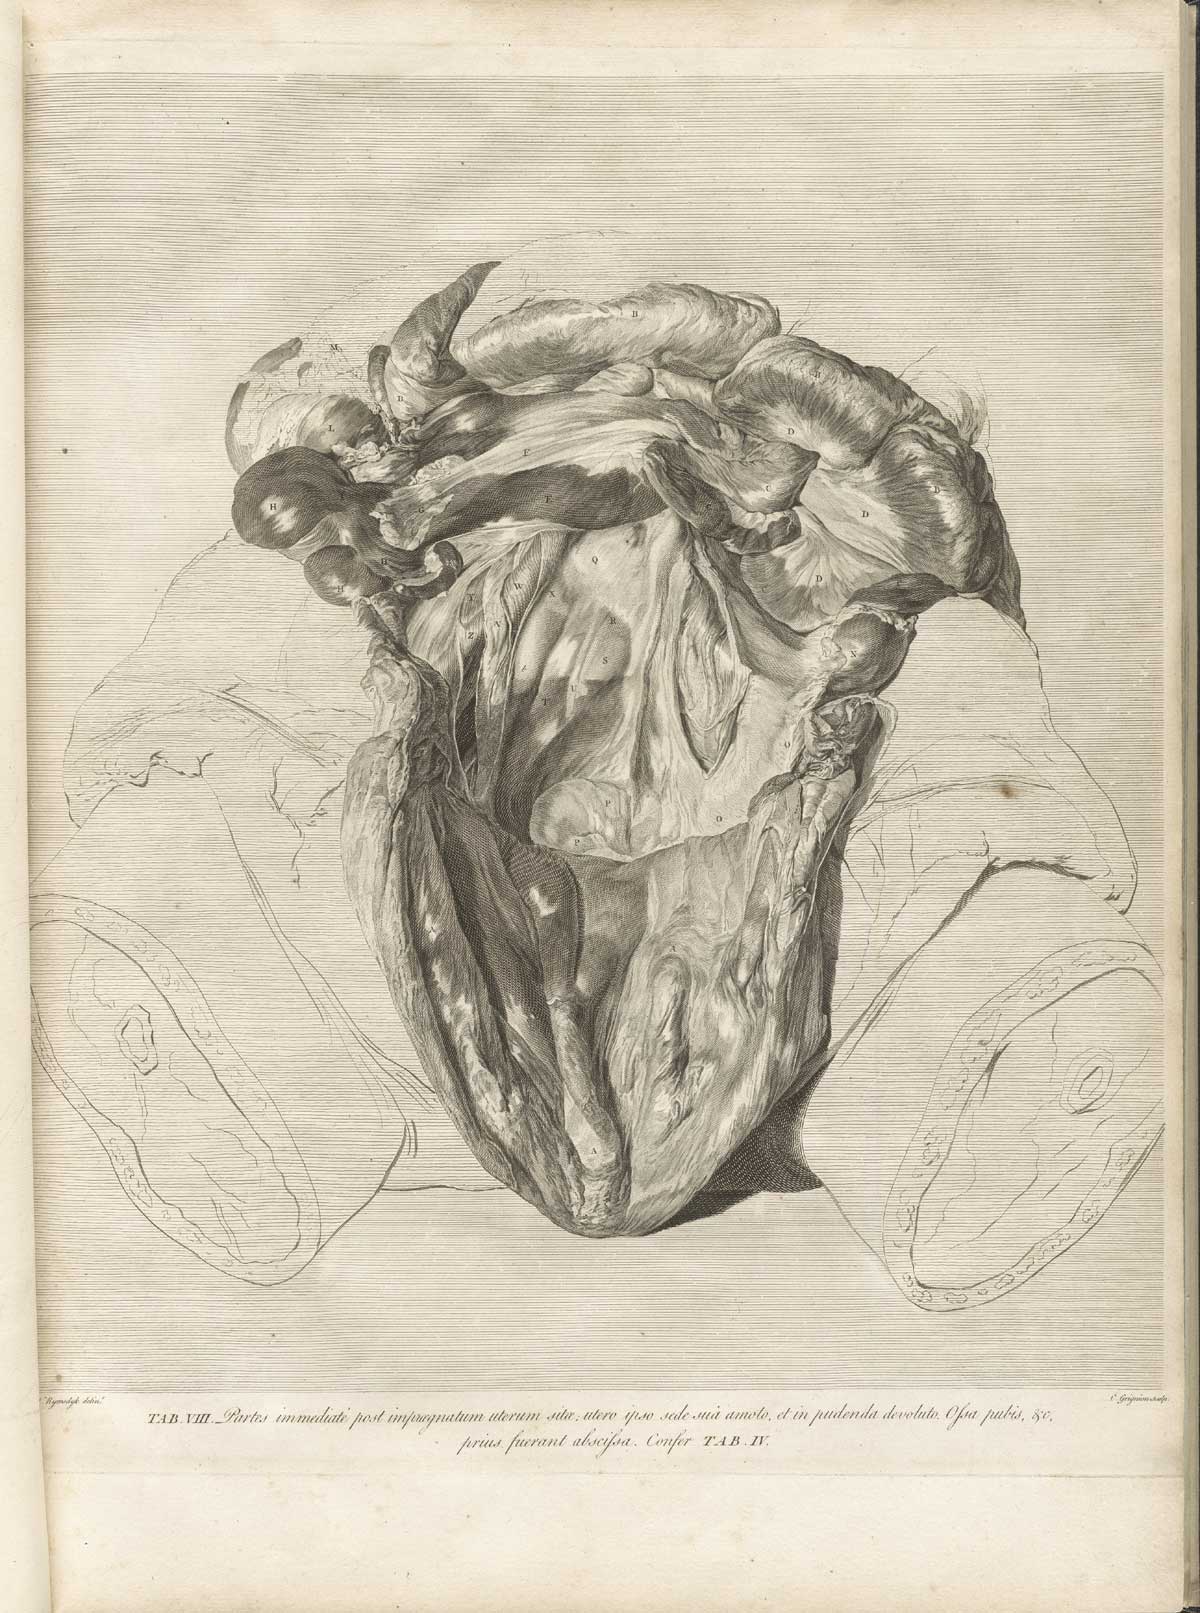 Table 8 of William Hunter's Anatomia uteri humani gravidi tabulis illustrata, featuring the frontal view of female dissected to expose the interior of the uterus post-pregnancy.